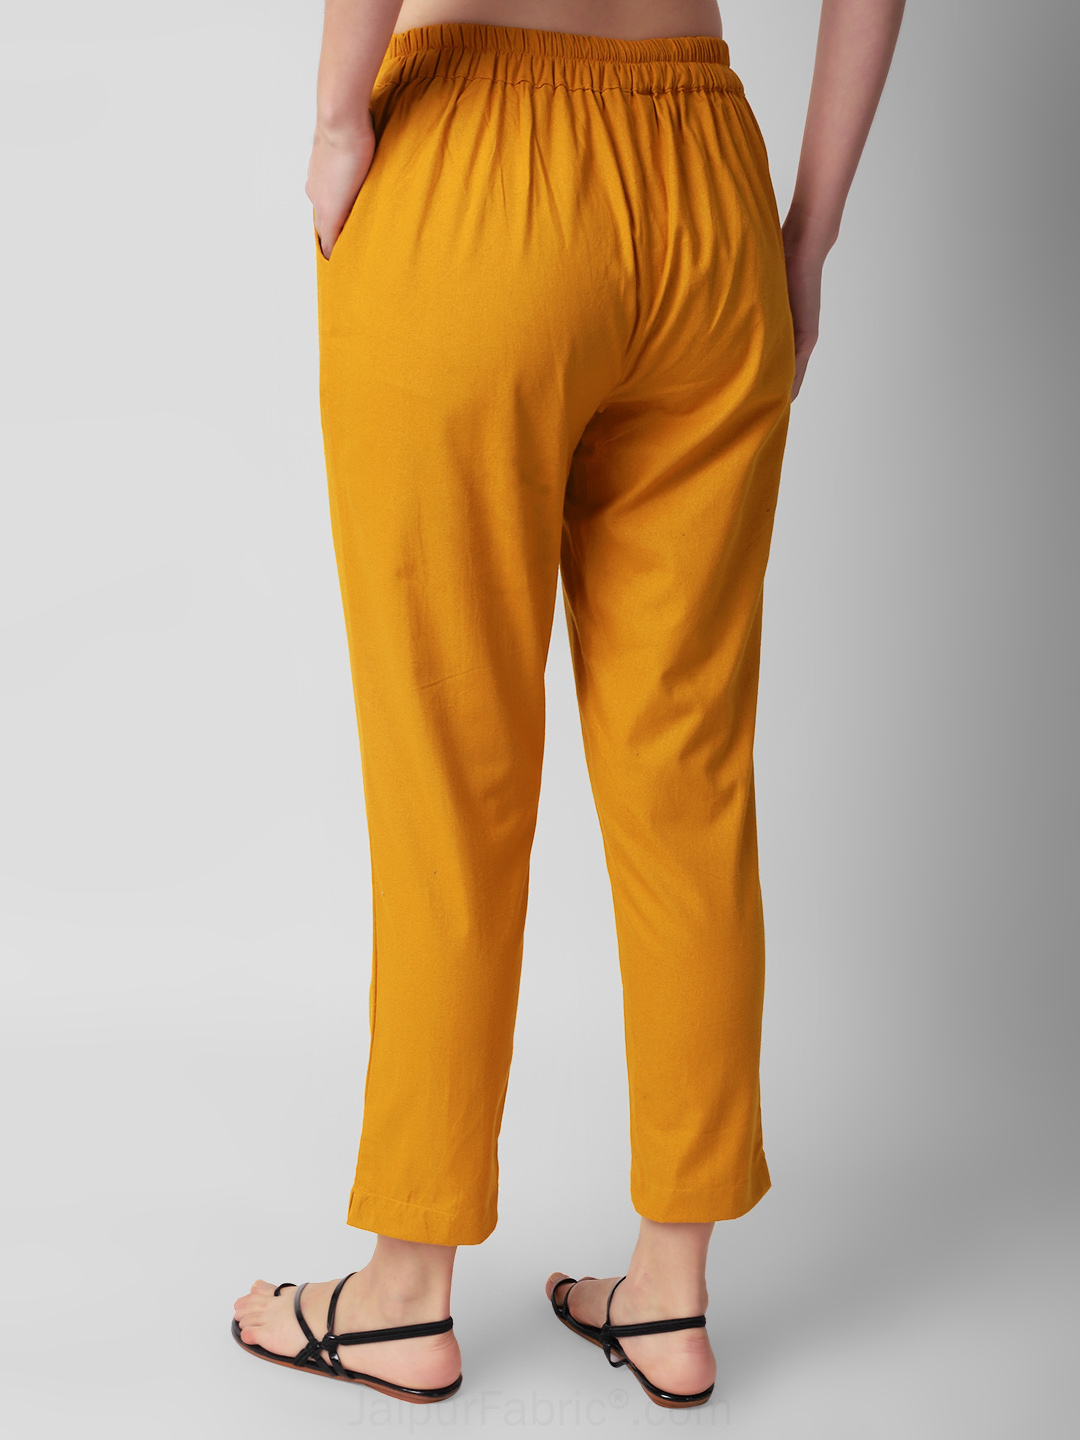 Mustard Harvest Women Cotton Pants casual and semi formal daily trousers